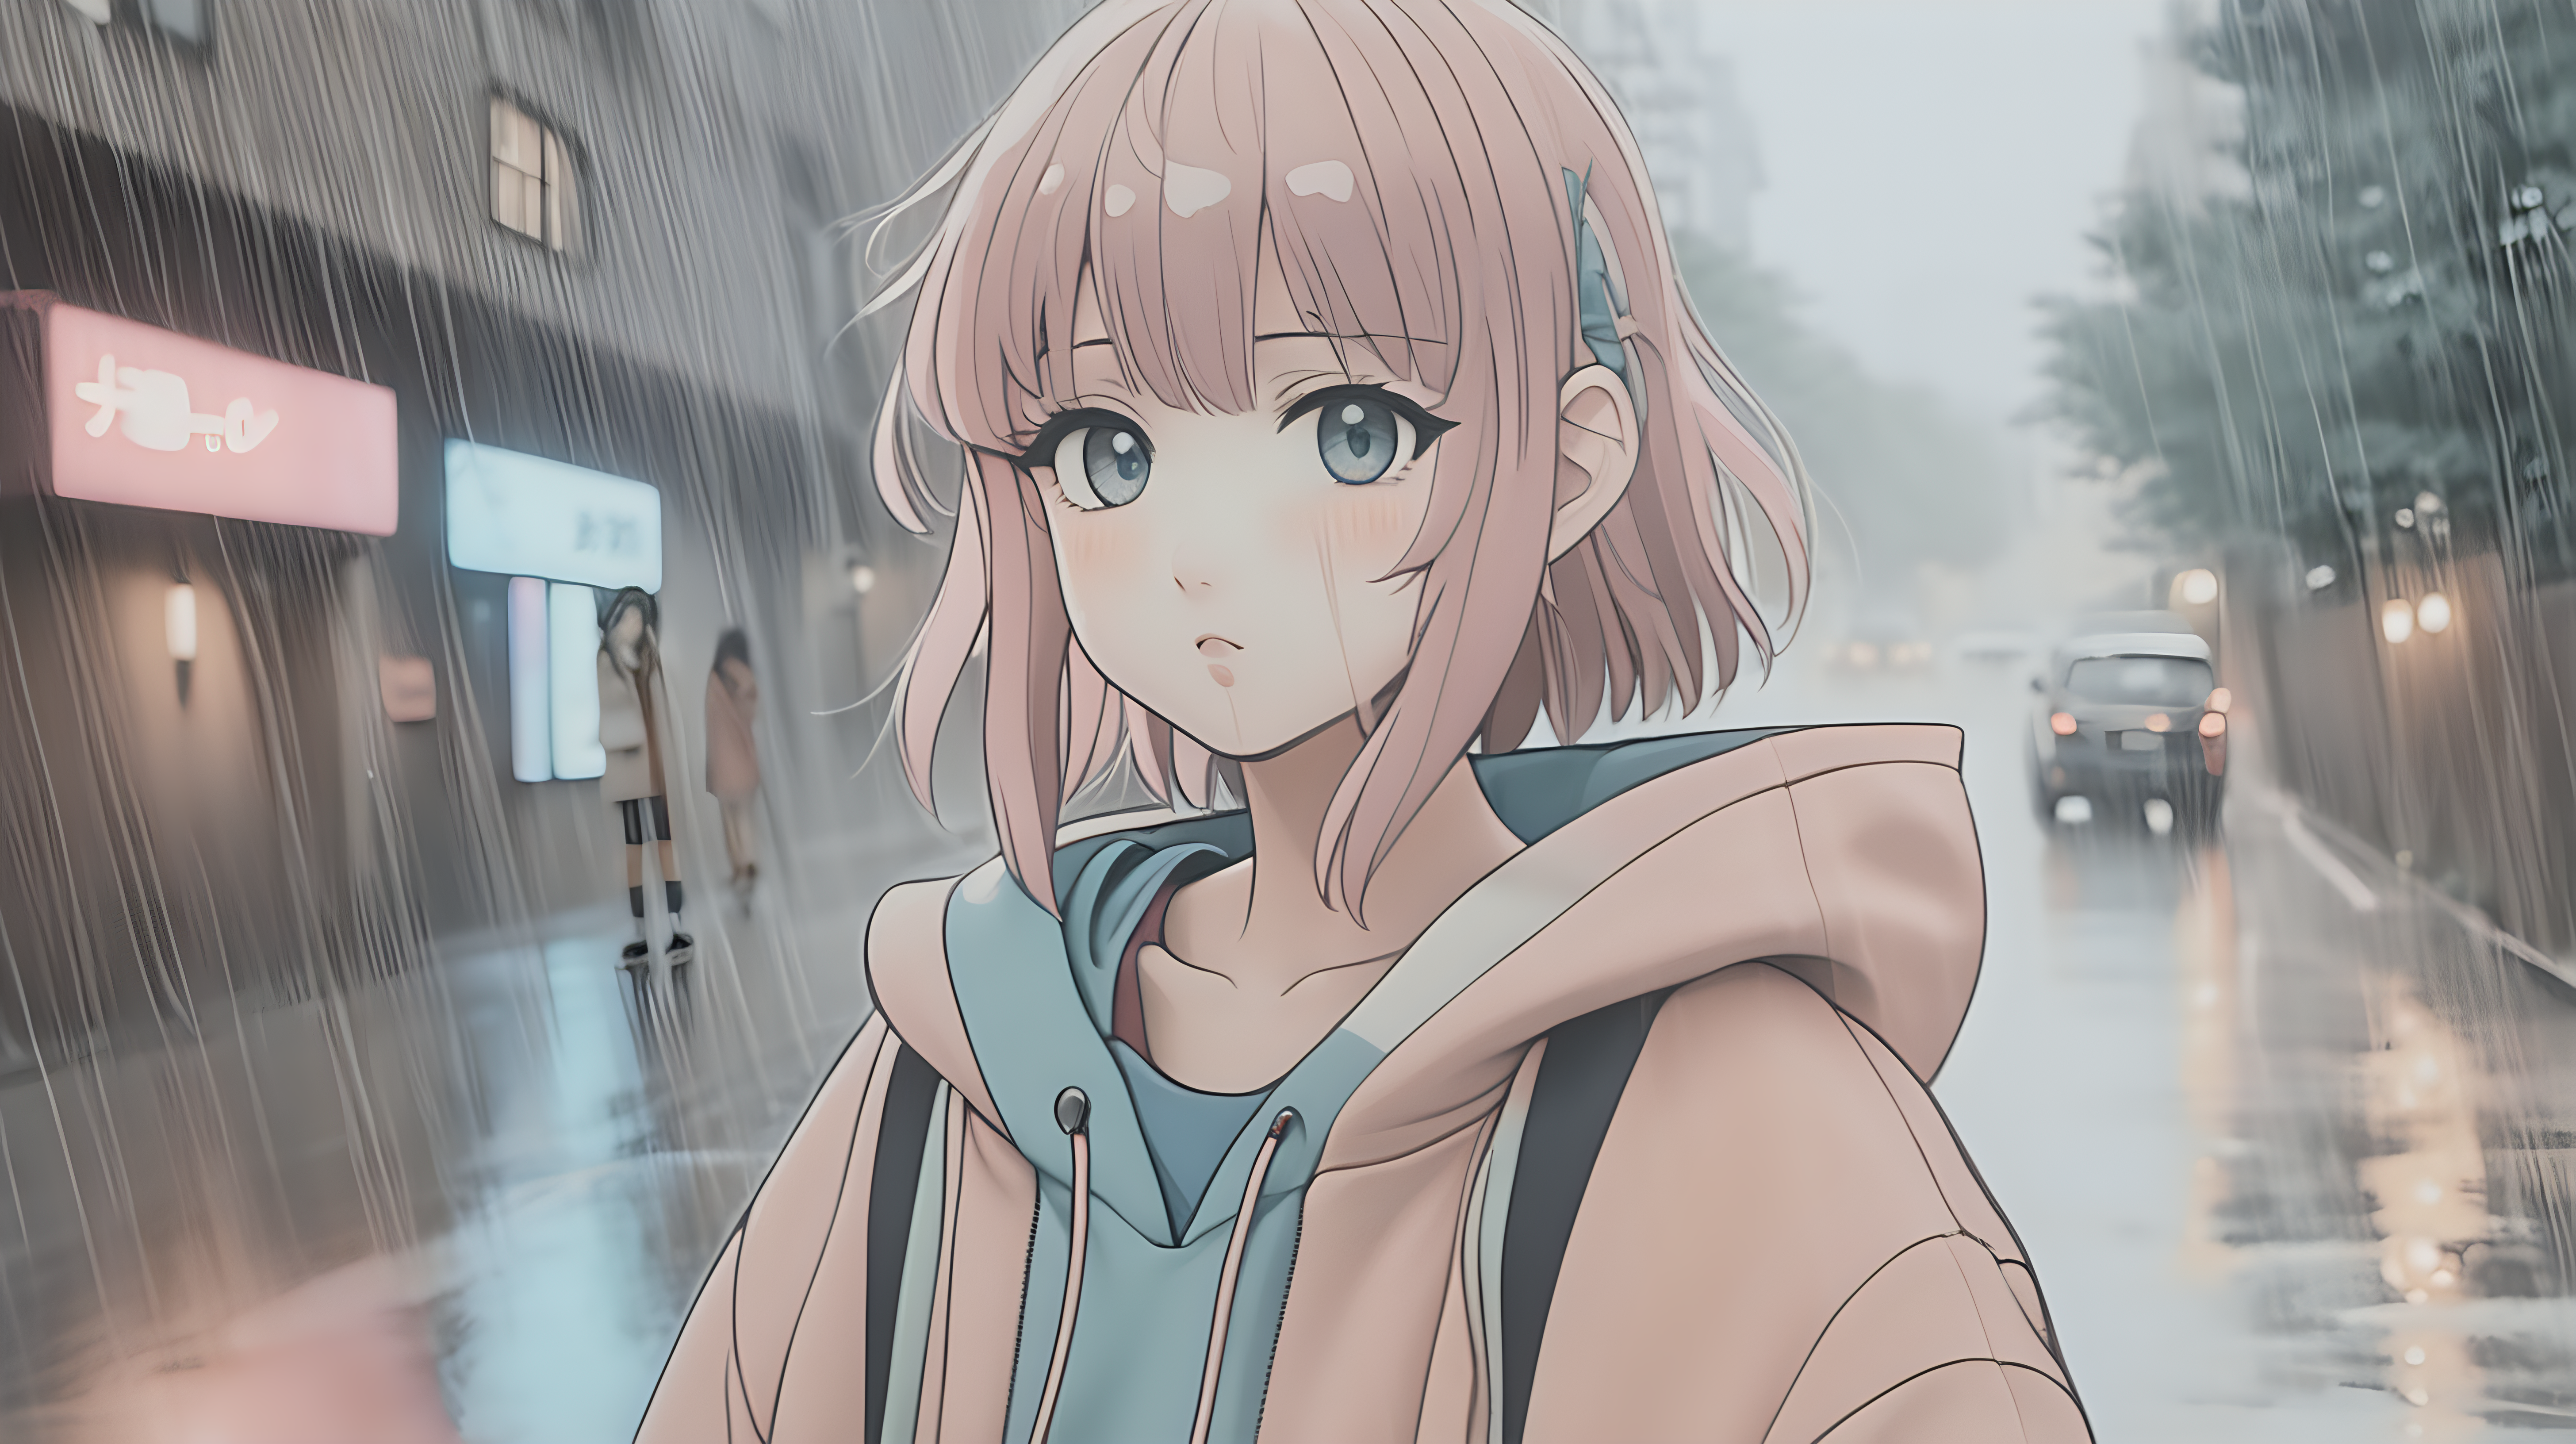 Anime girl in the rain muted pastel colors